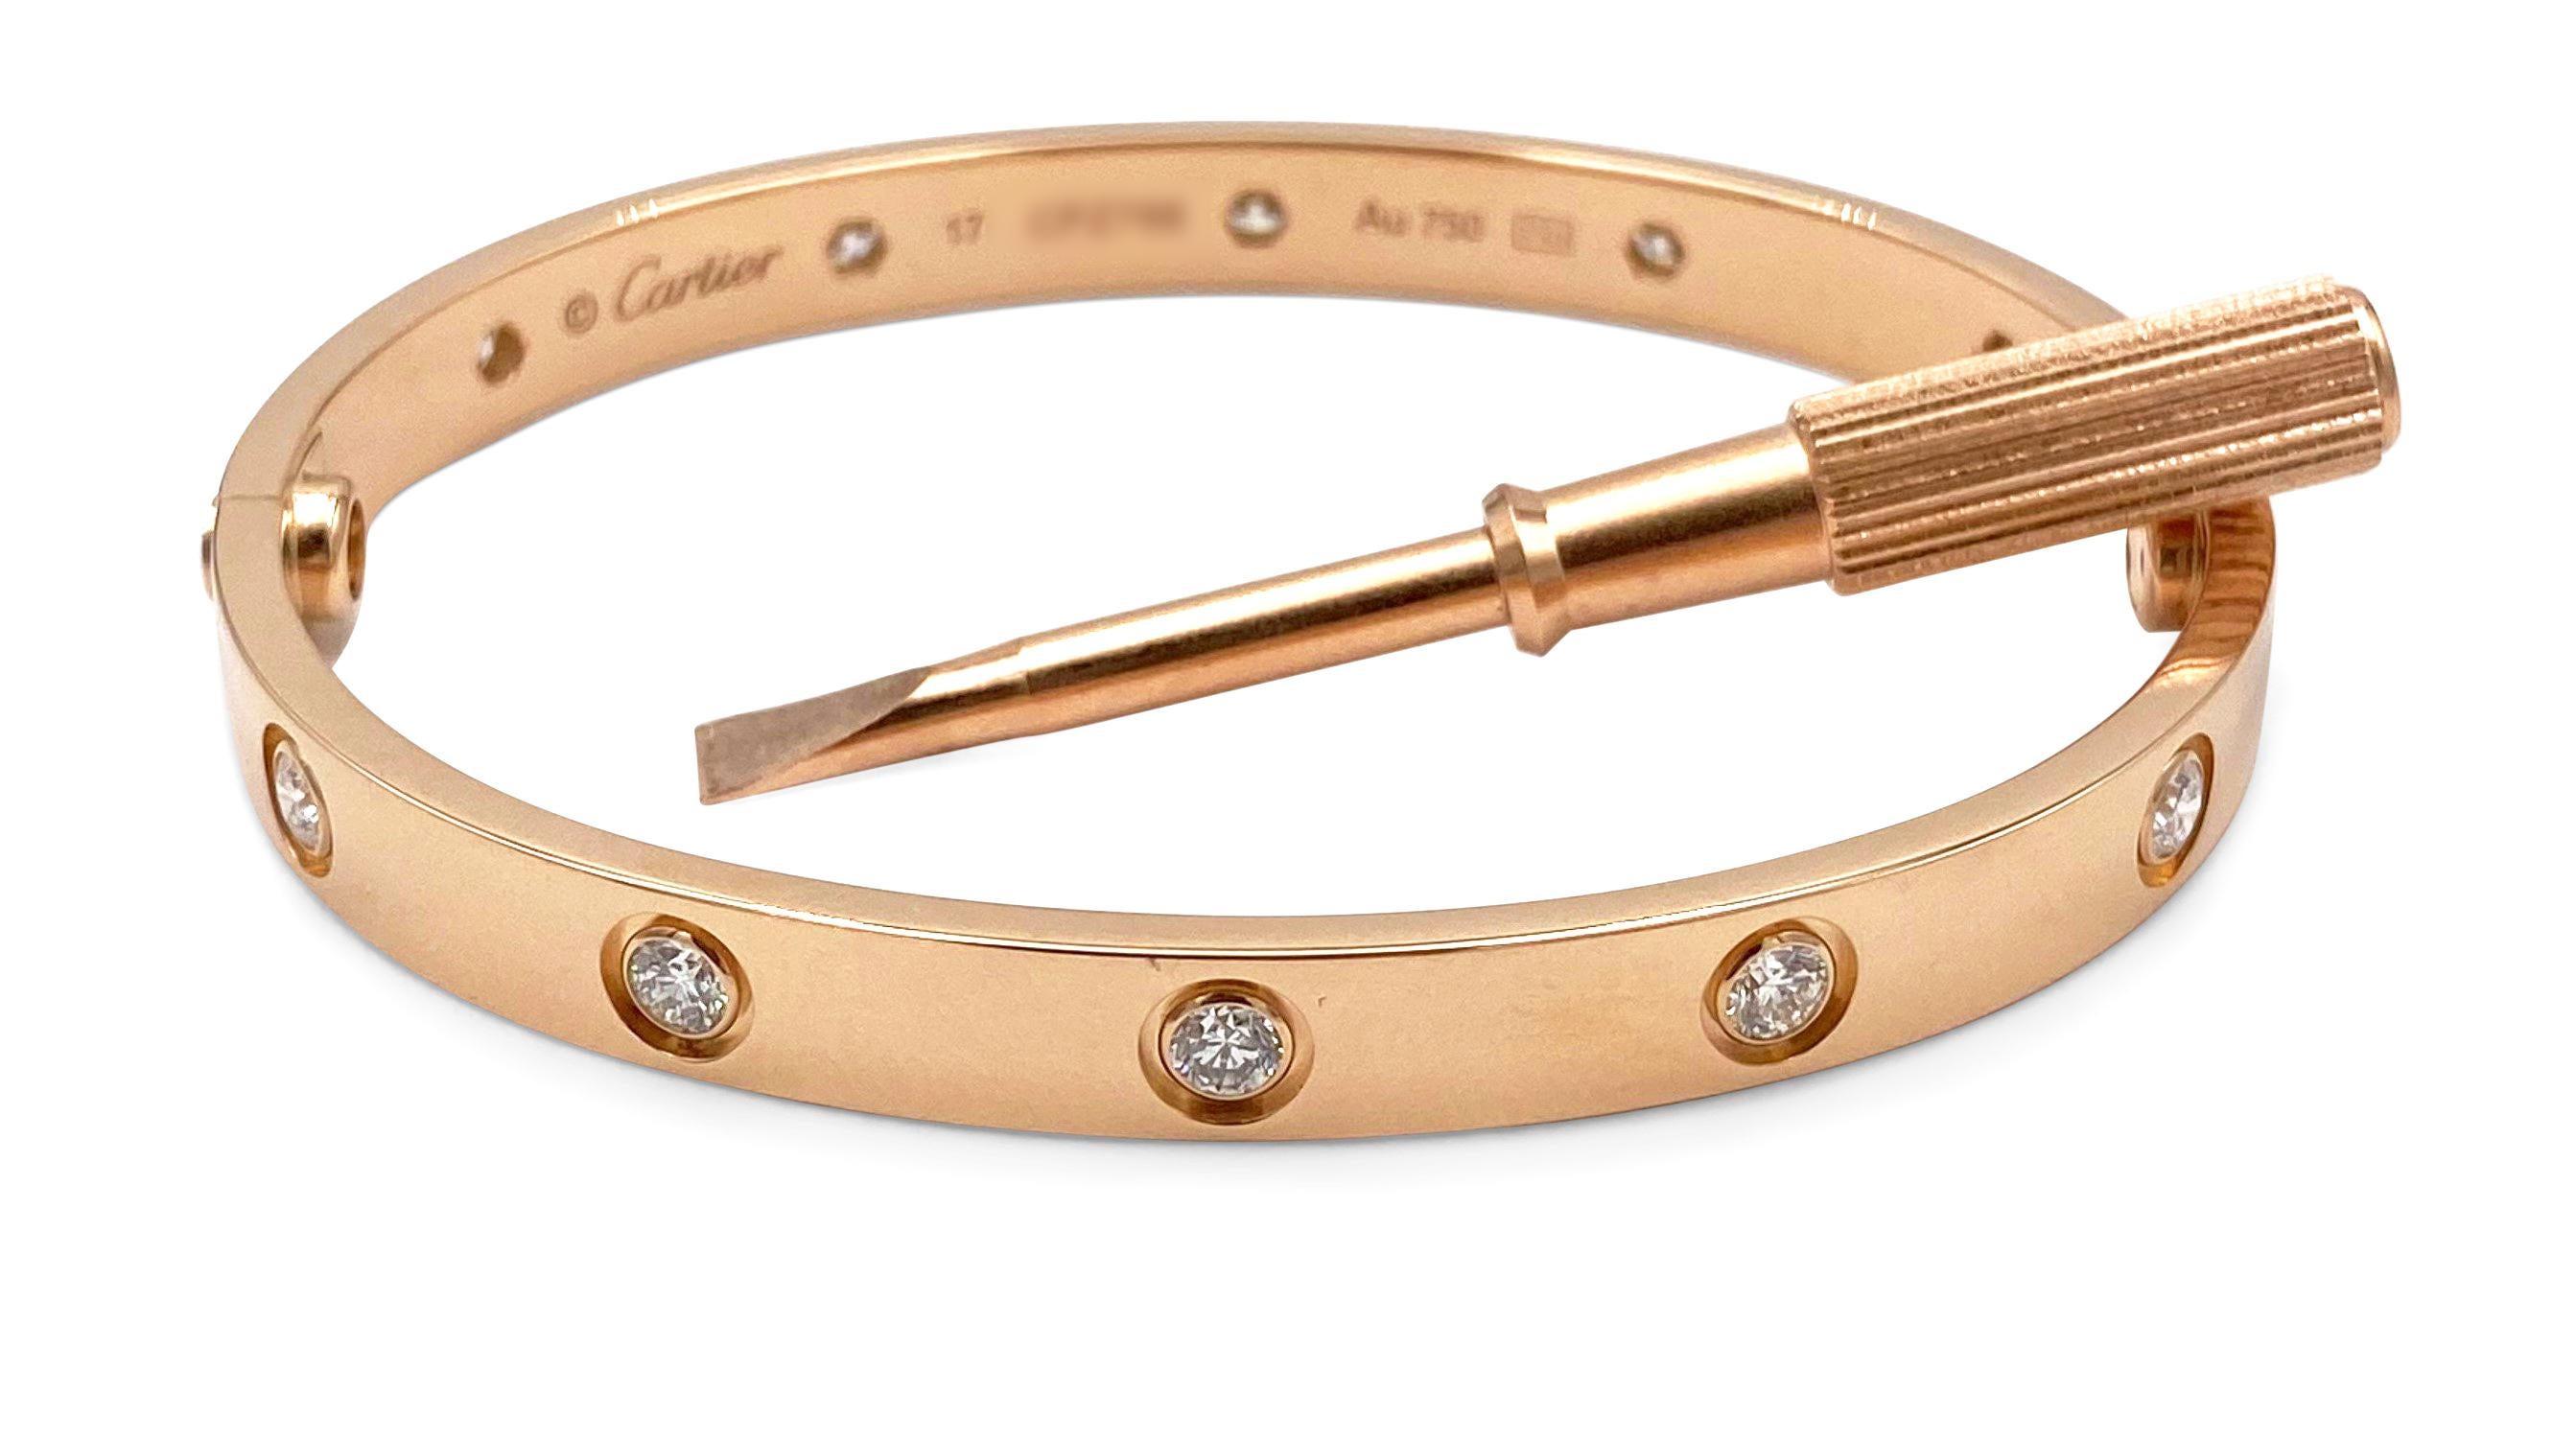 Authentic Cartier Love bangle in 18 karat rose gold set with ten round brilliant cut diamonds (E-F in color, VS clarity) weighing an estimated 0.96 carats total. Size 17. Signed Cartier, Au750. Love bangle comes with the orginal screwdriver, Cartier